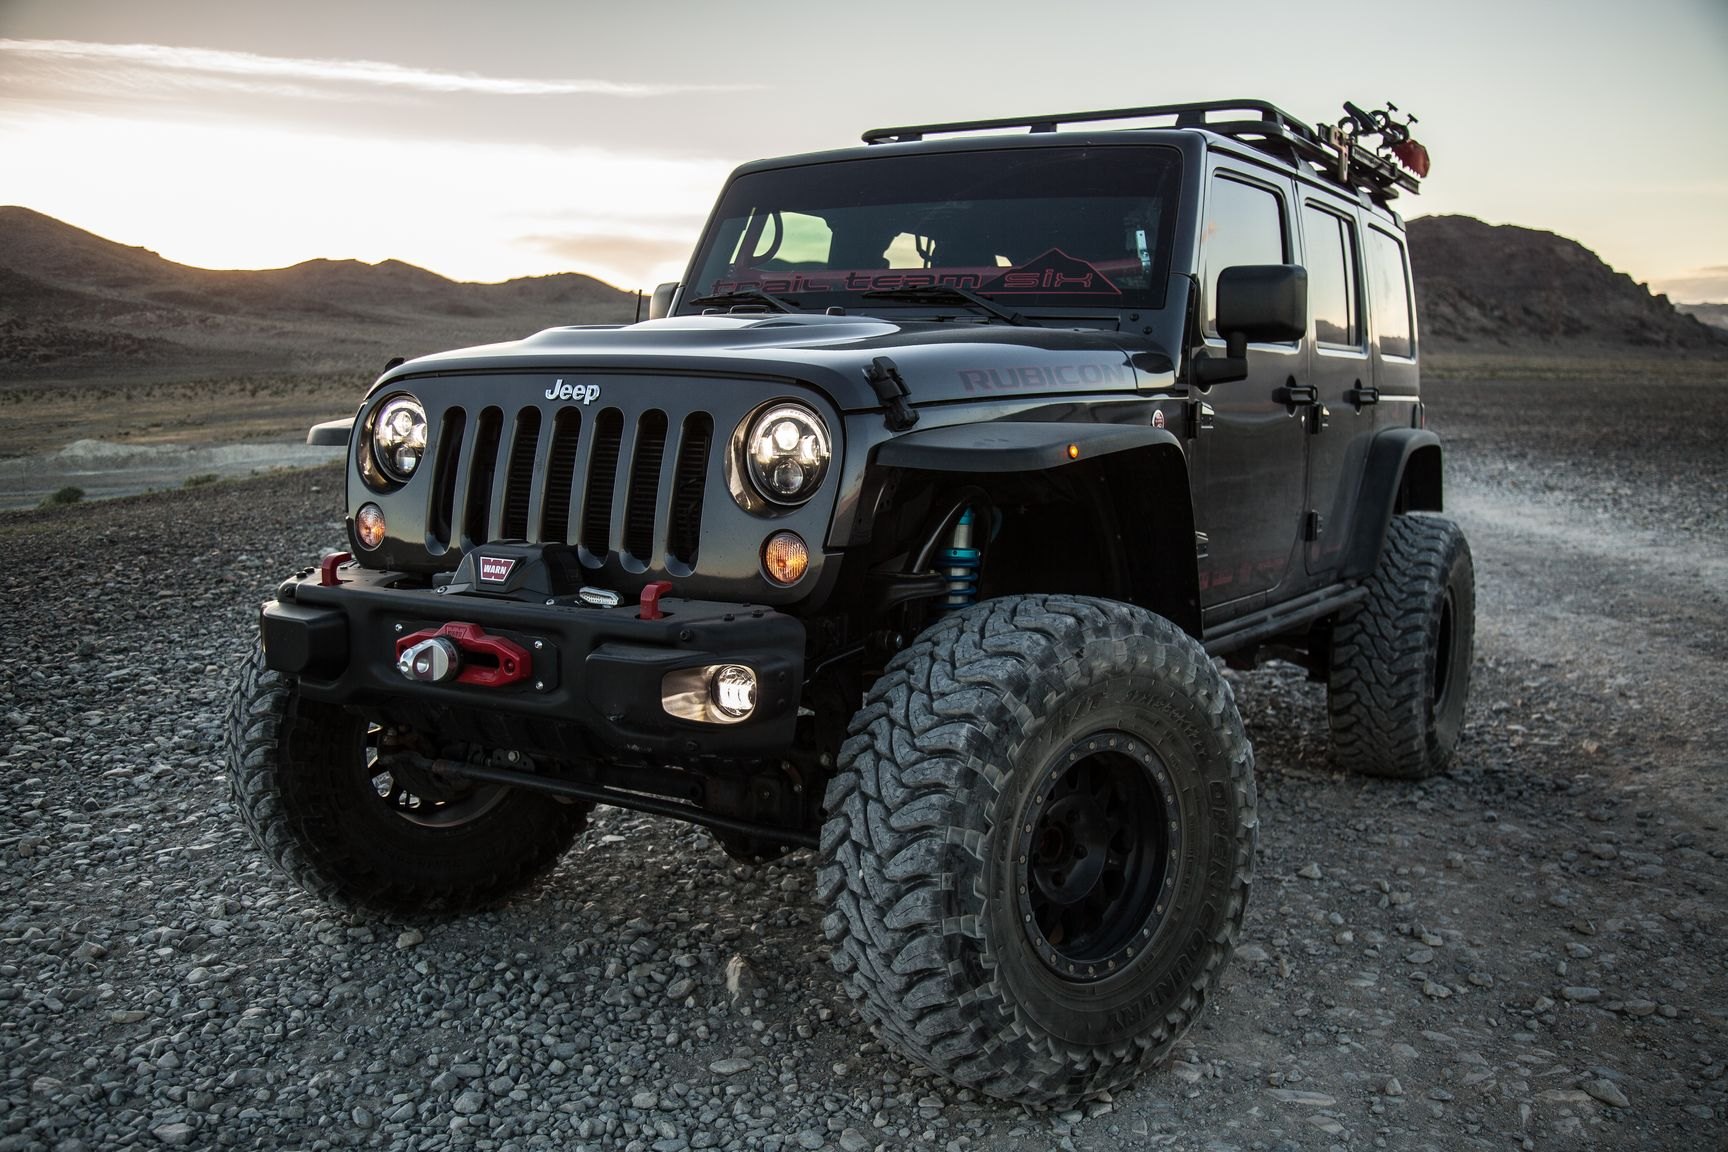 Black Lifted Jeep Wrangler with Warn Front Bumper - Photo by Rebel Off-Road